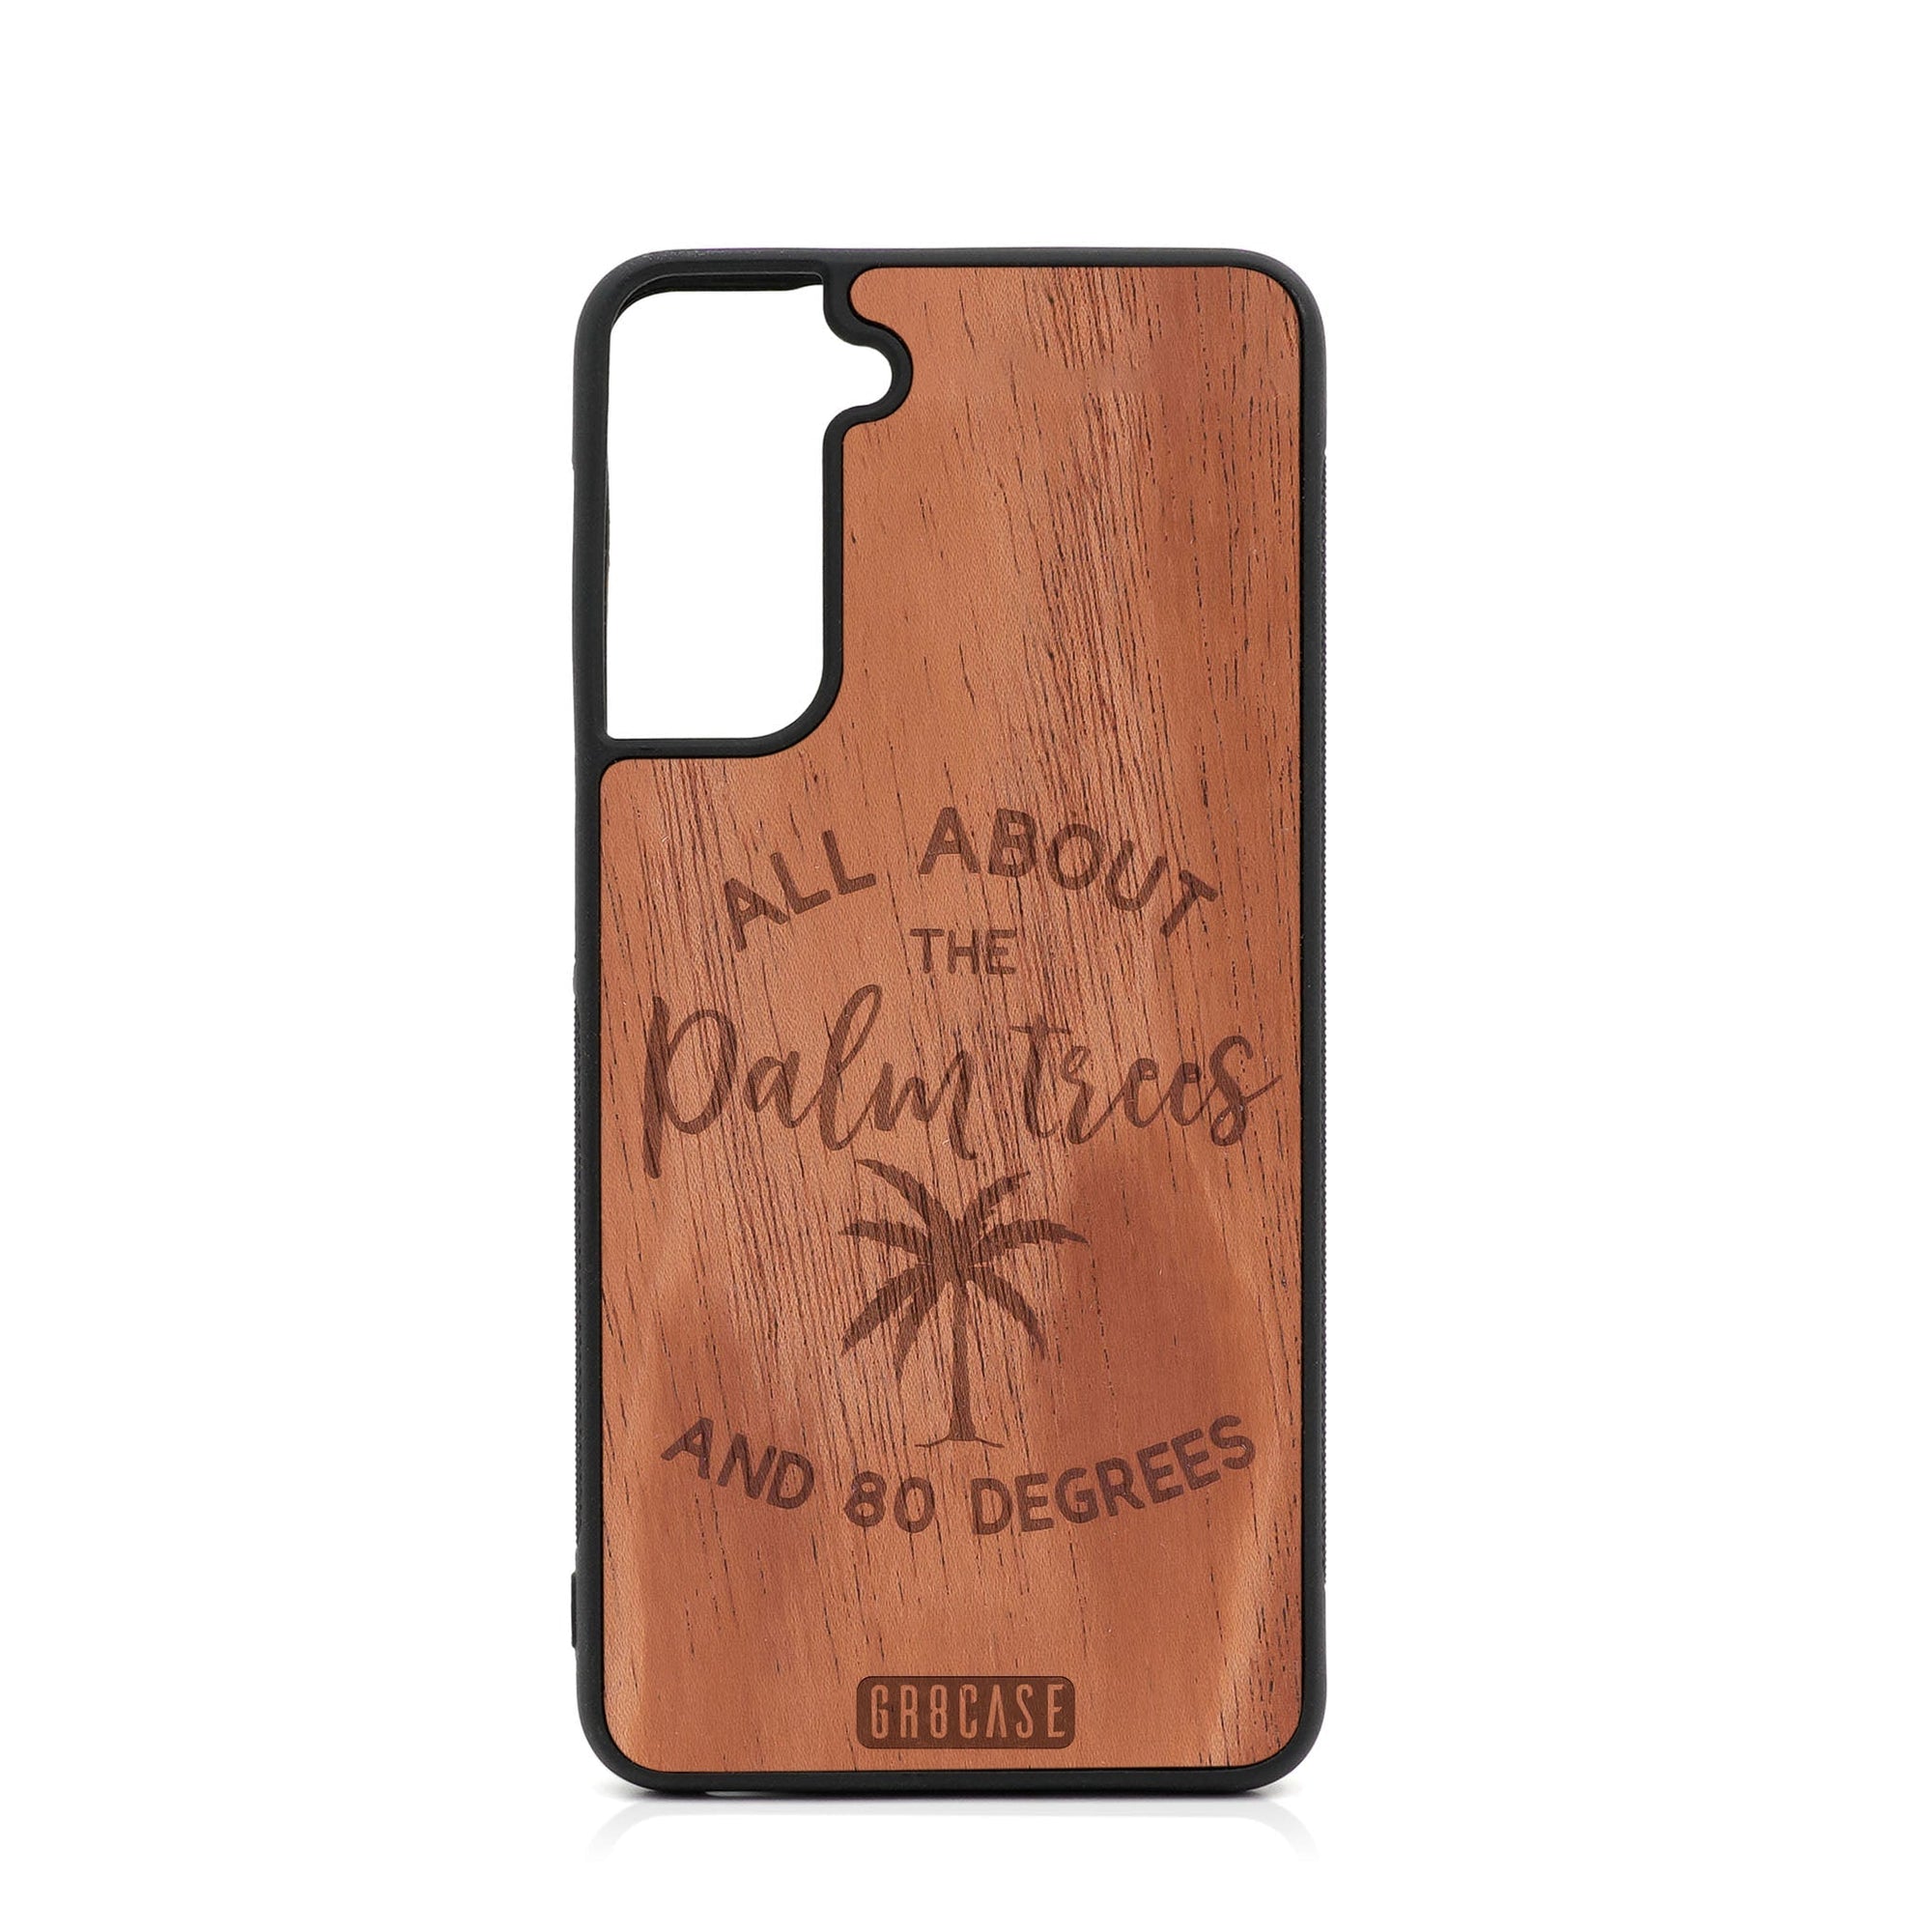 All About The Palm Trees And 80 Degree Design Wood Case For Samsung Galaxy S21 FE 5G